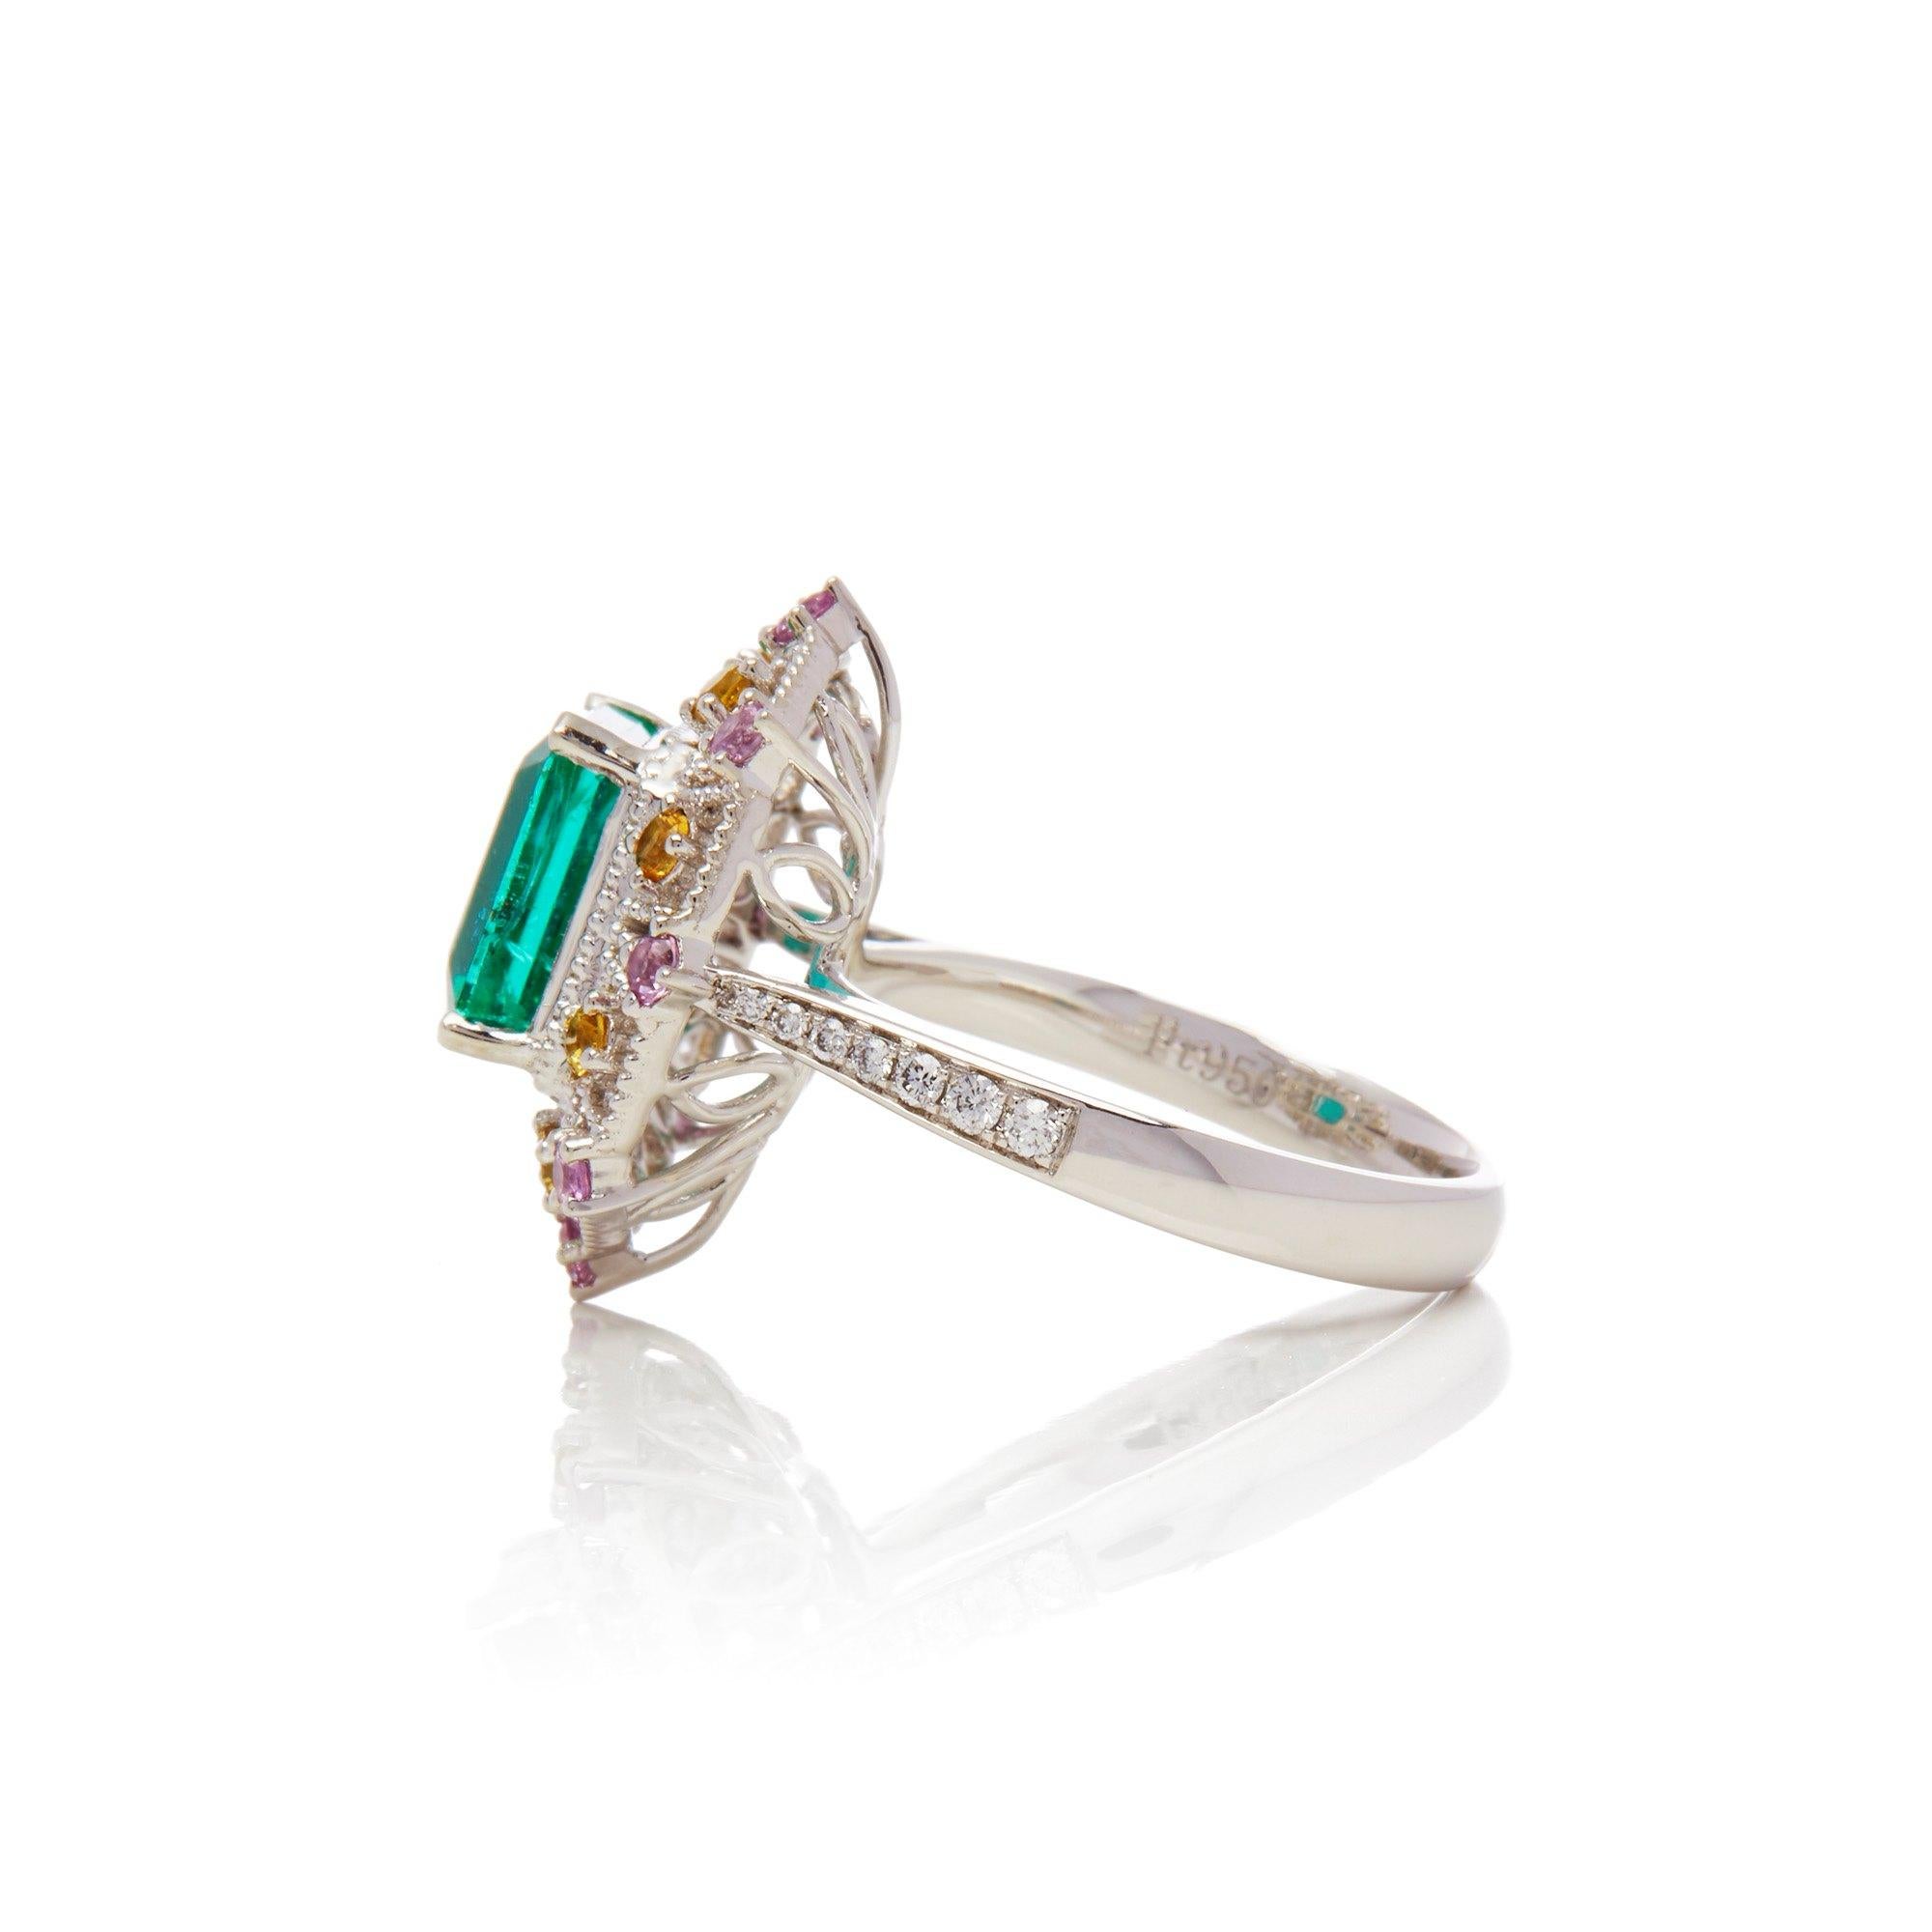 This ring designed by David Jerome is from his private collection and features one Emerald cut Emerald sourced in the chivor mine in Columbia totalling 3.03cts. Set with a mix of round brilliant cut Diamonds, pink and yellow Sapphires totalling